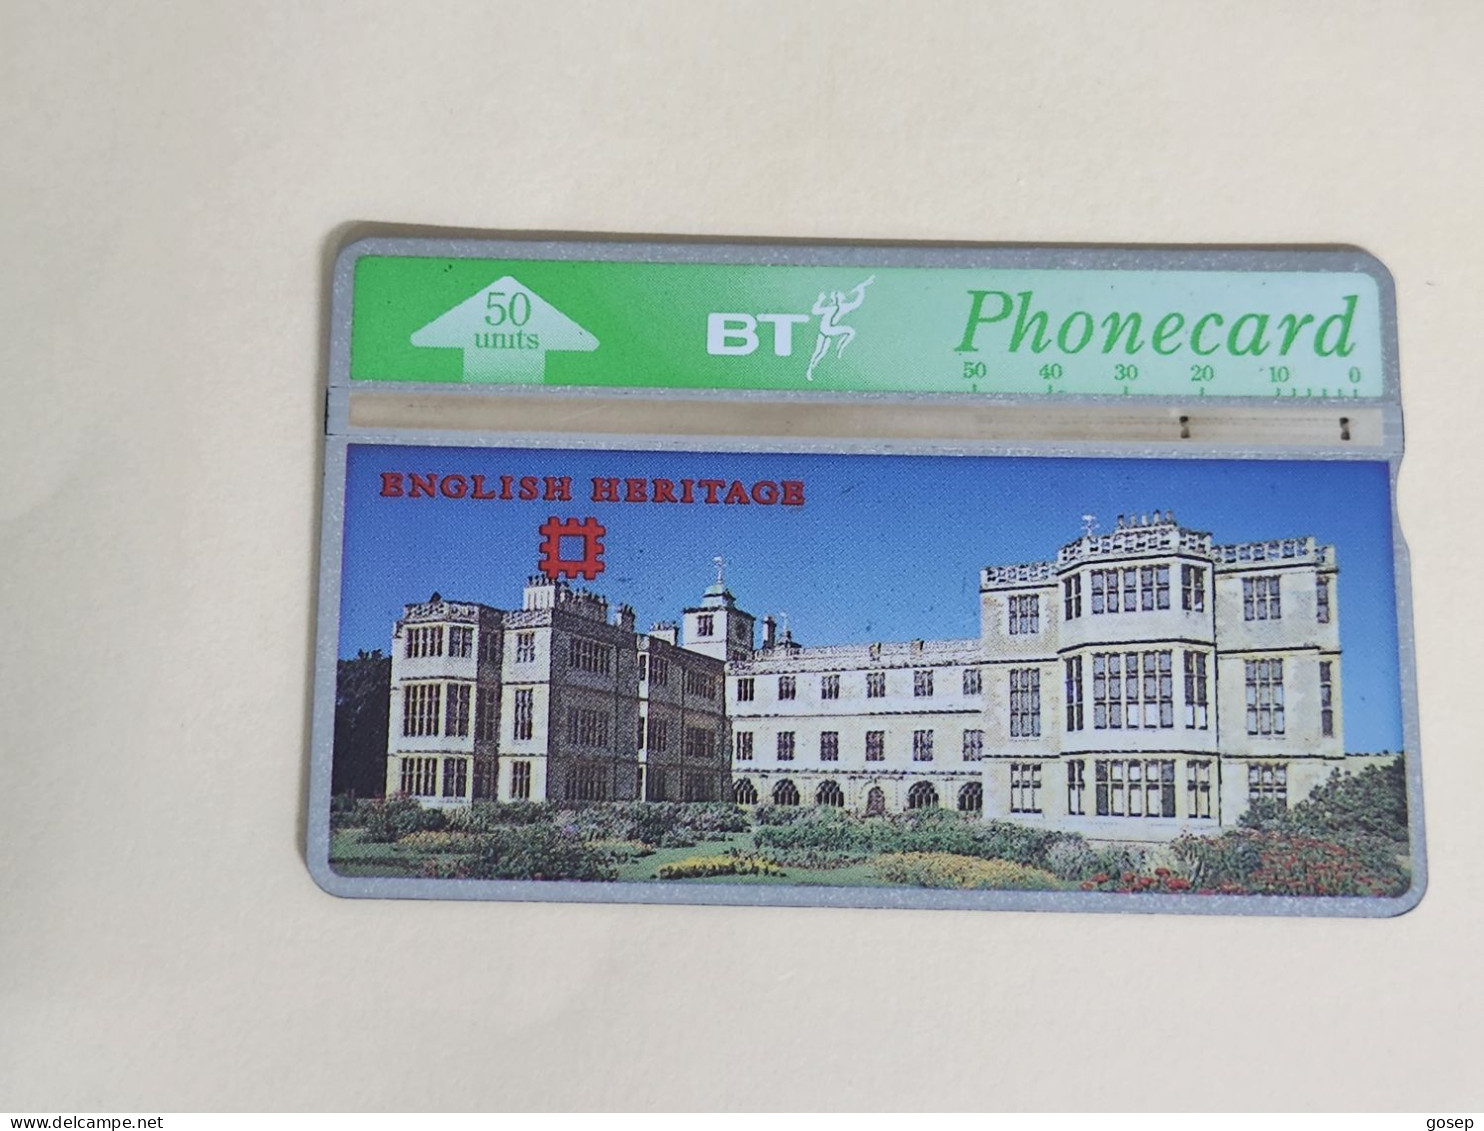 United Kingdom-(BTA103)-HERITAGE-audley End House-(164)(50units)(547C79583)-price Cataloge3.00£-used+1card Prepiad Free - BT Publicitaire Uitgaven